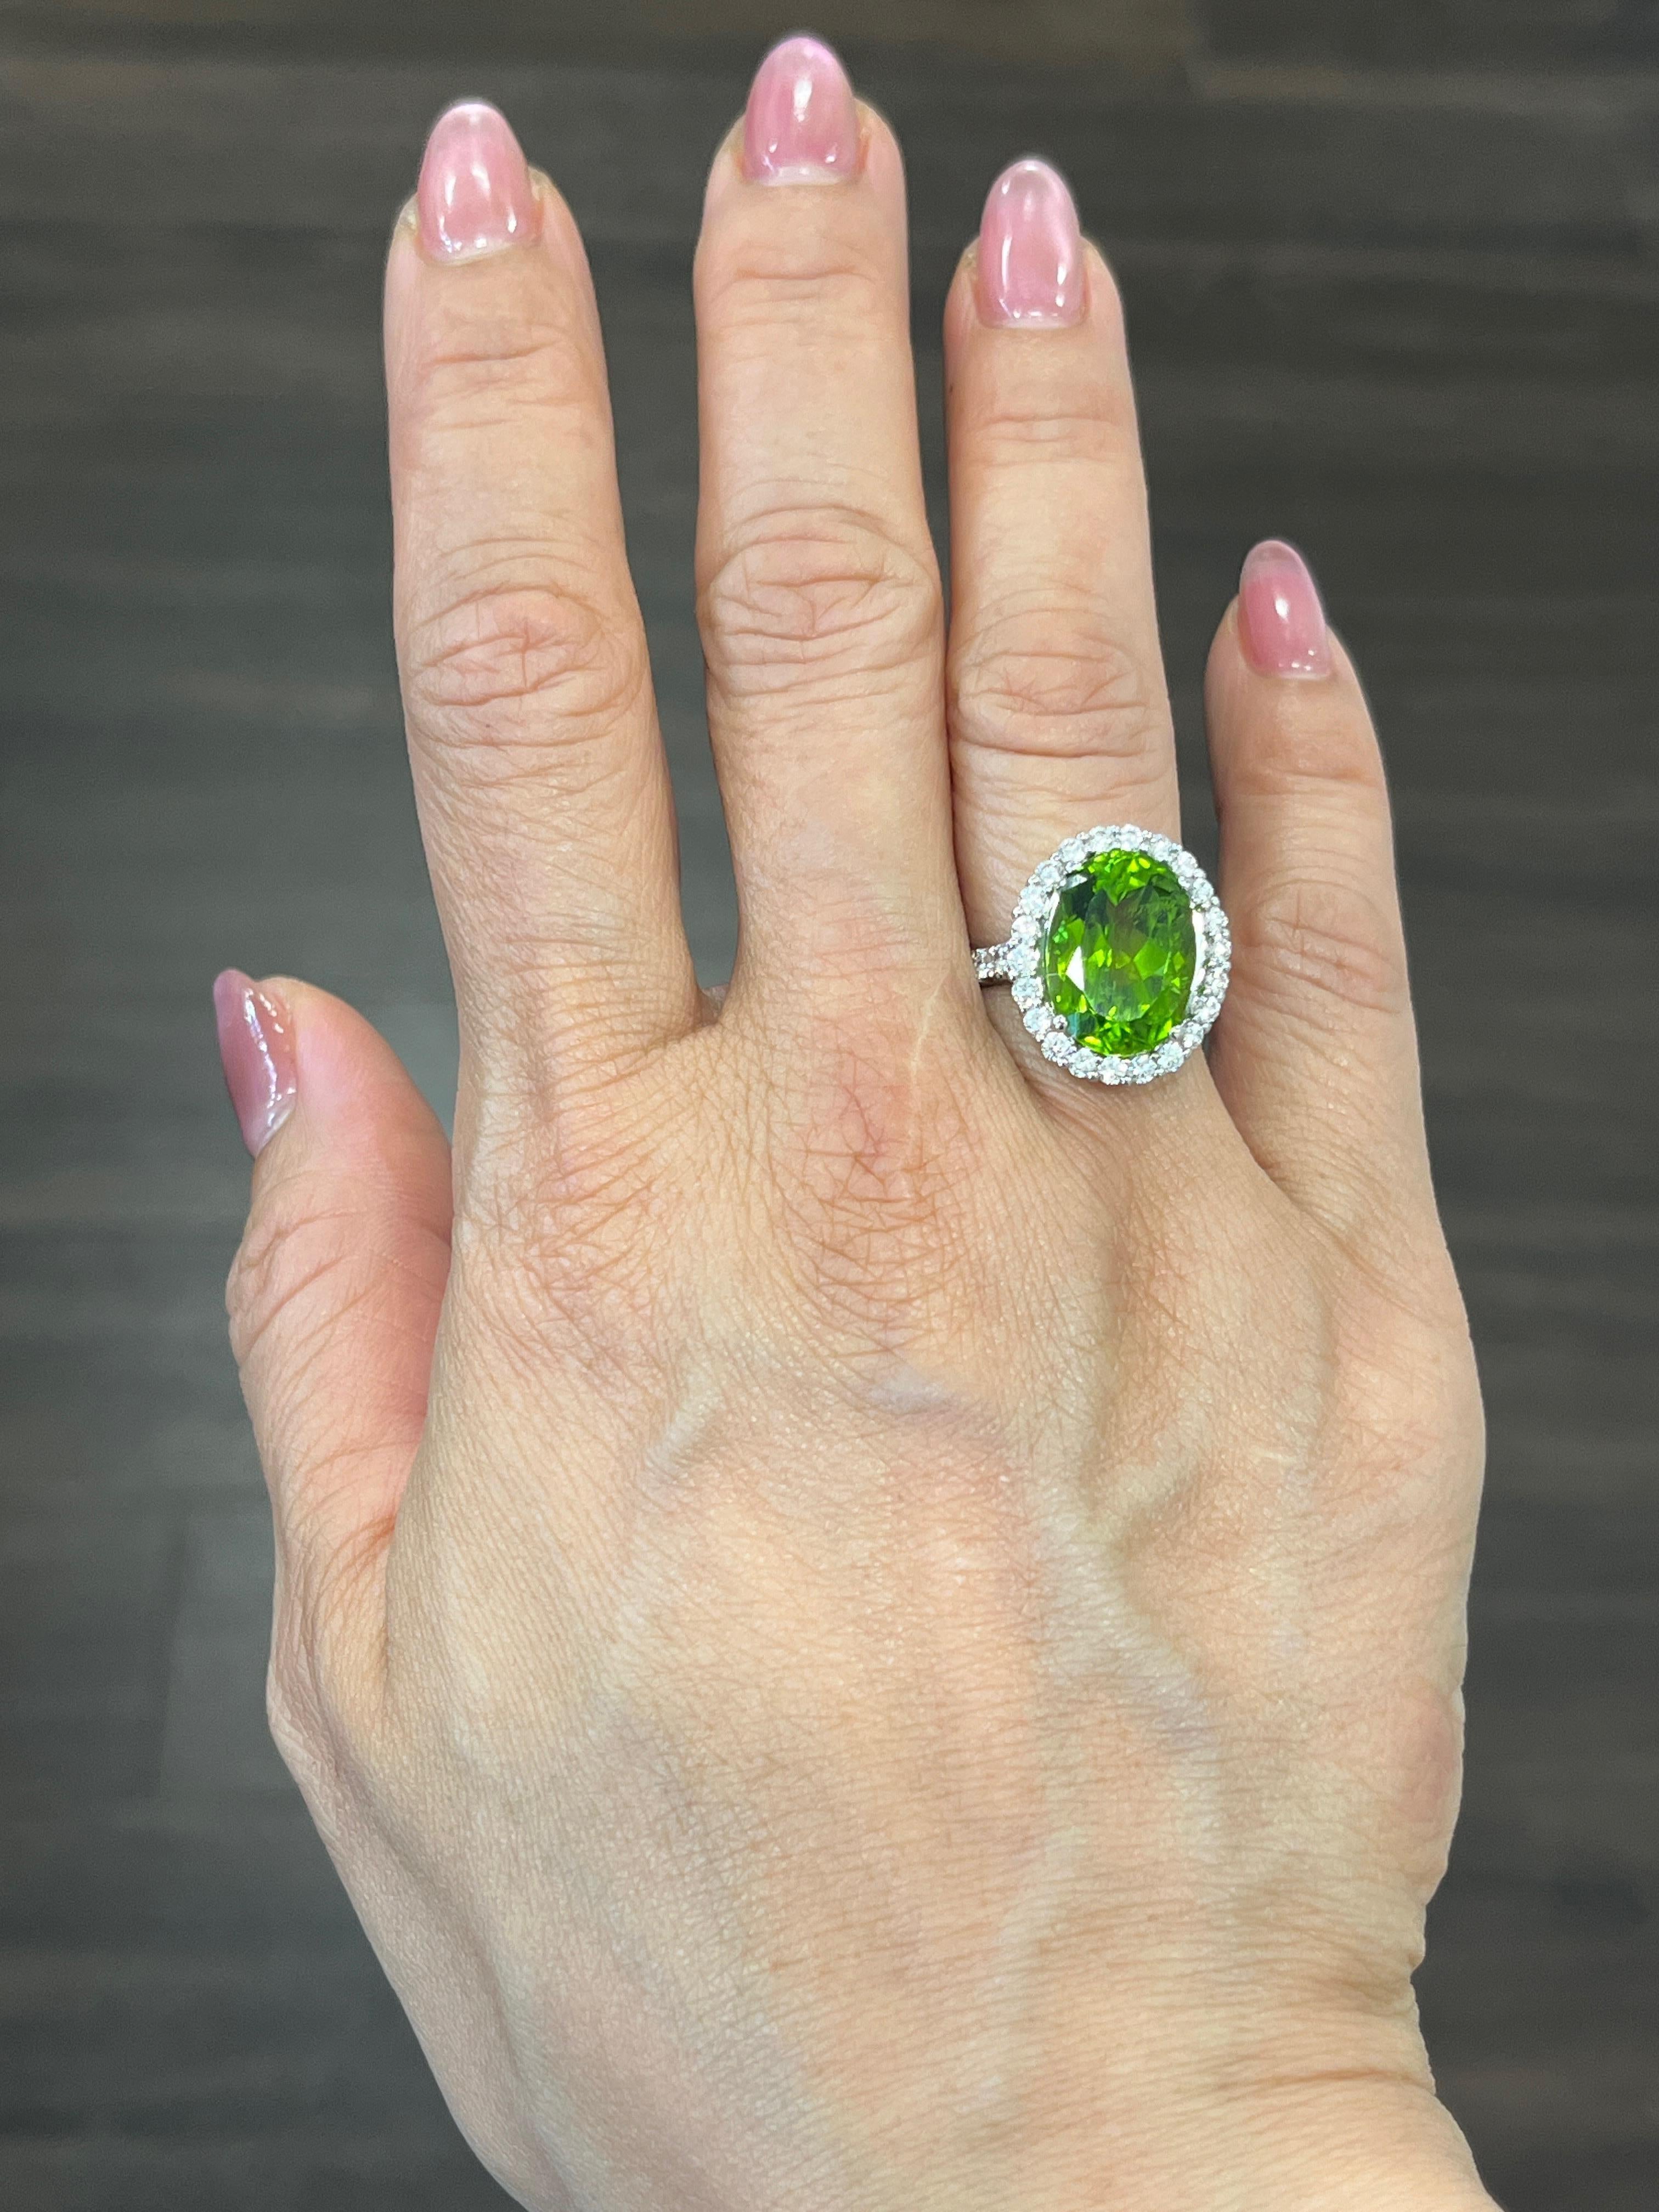 This stunning 18k white gold ring is set with a natural green peridot that weighs 9.35 ct. It is surrounded with 28 round cut diamonds weighing 1.24 ct. The ring boasts a color of F/G and a clarity of VS1. Such an amazing ring, it is sure to turn